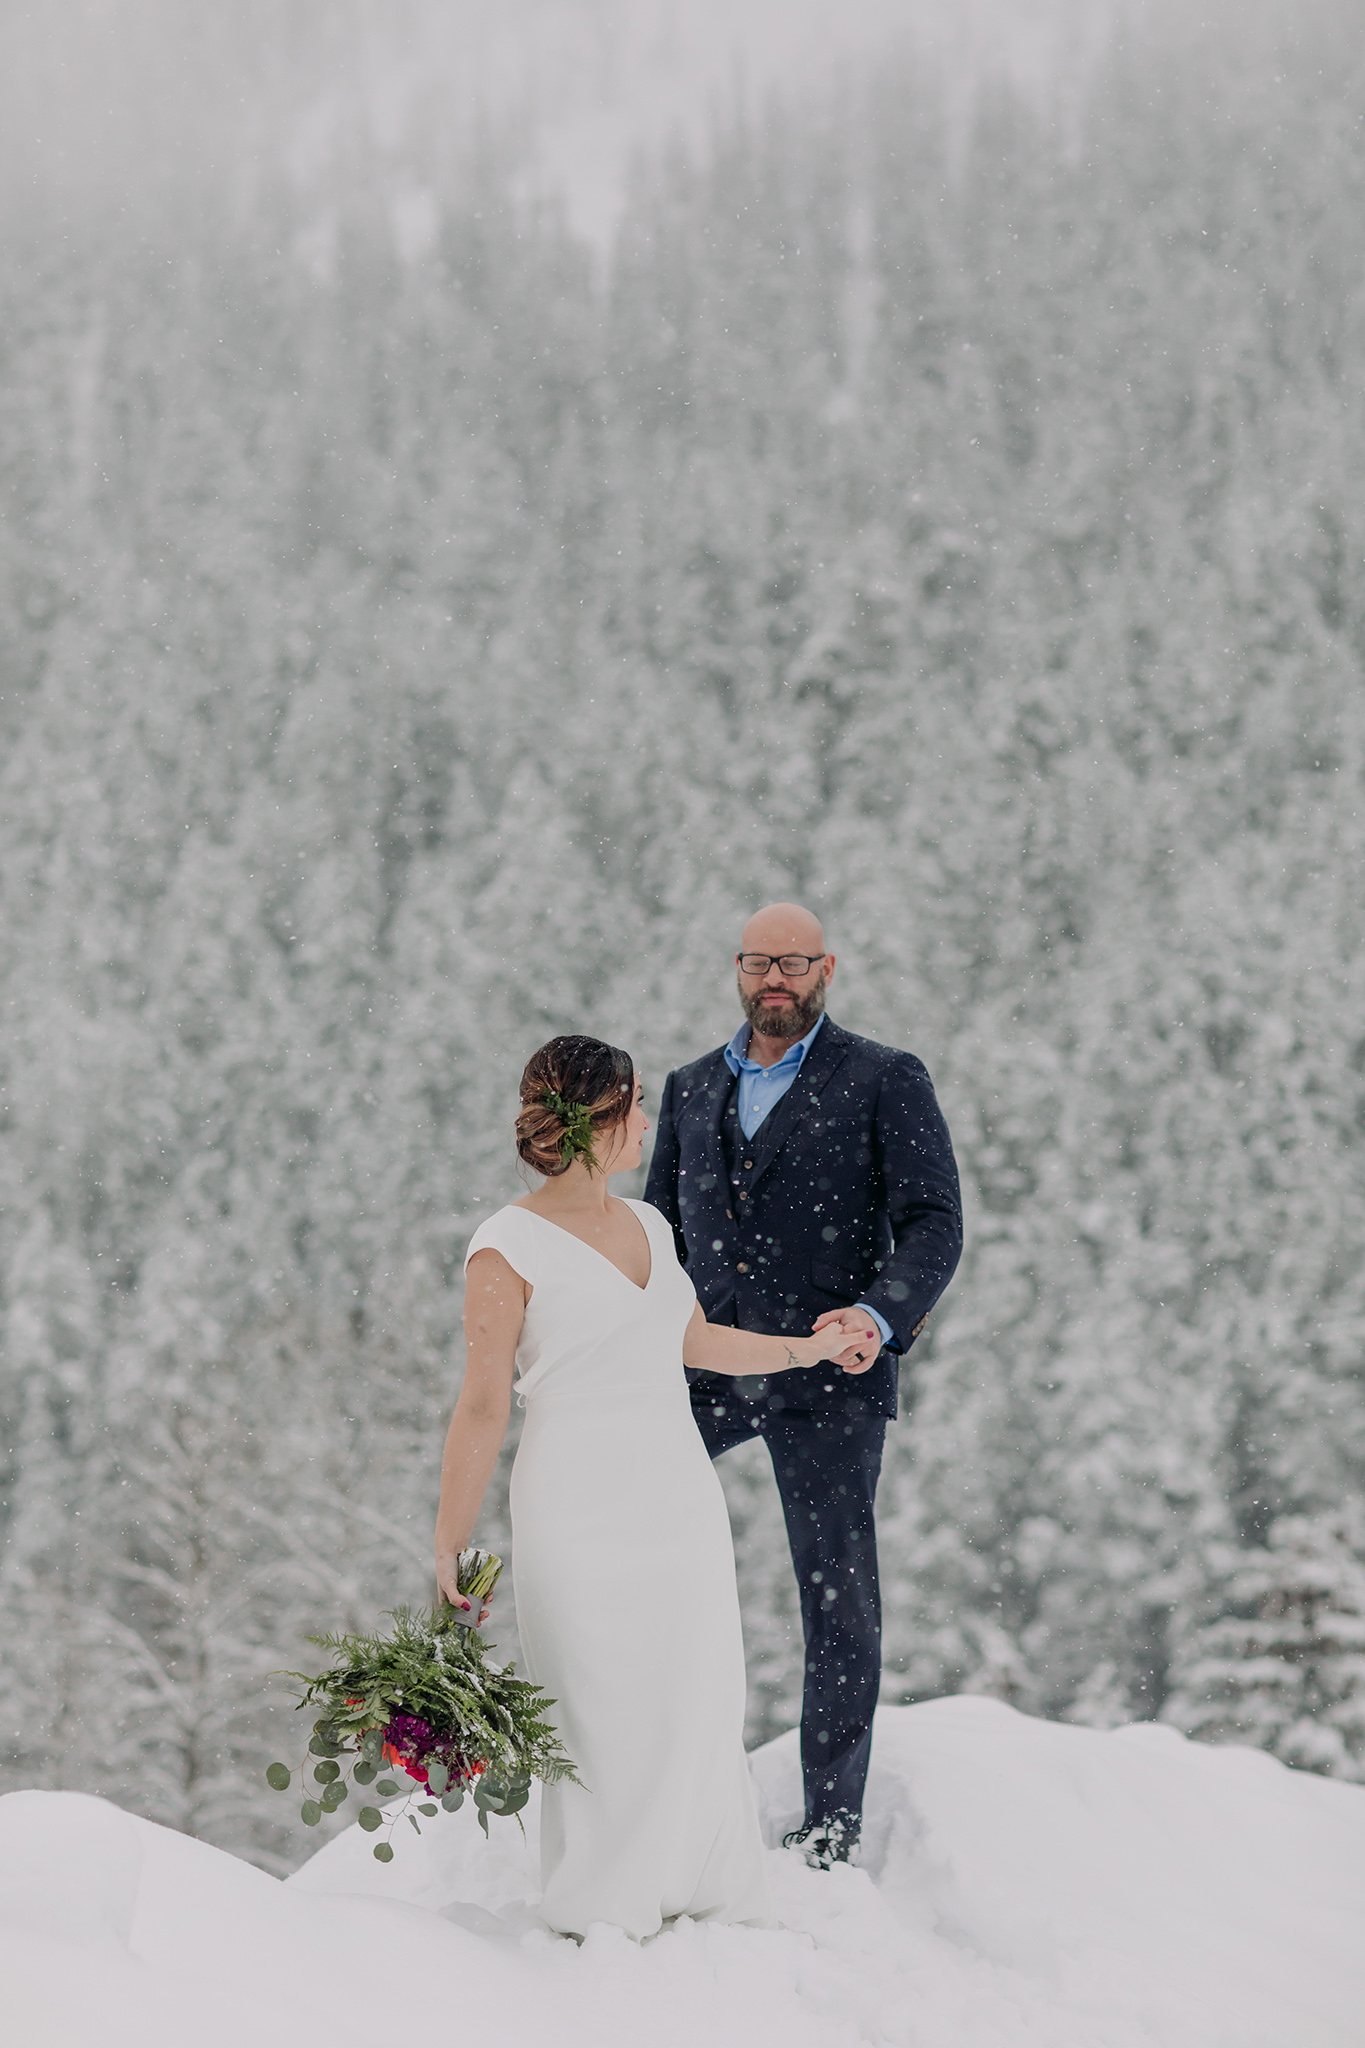 snowy mountain elopement outdoor bride & groom portraits with falling snow photographed by mountain elopement & wedding photographer ENV Photography